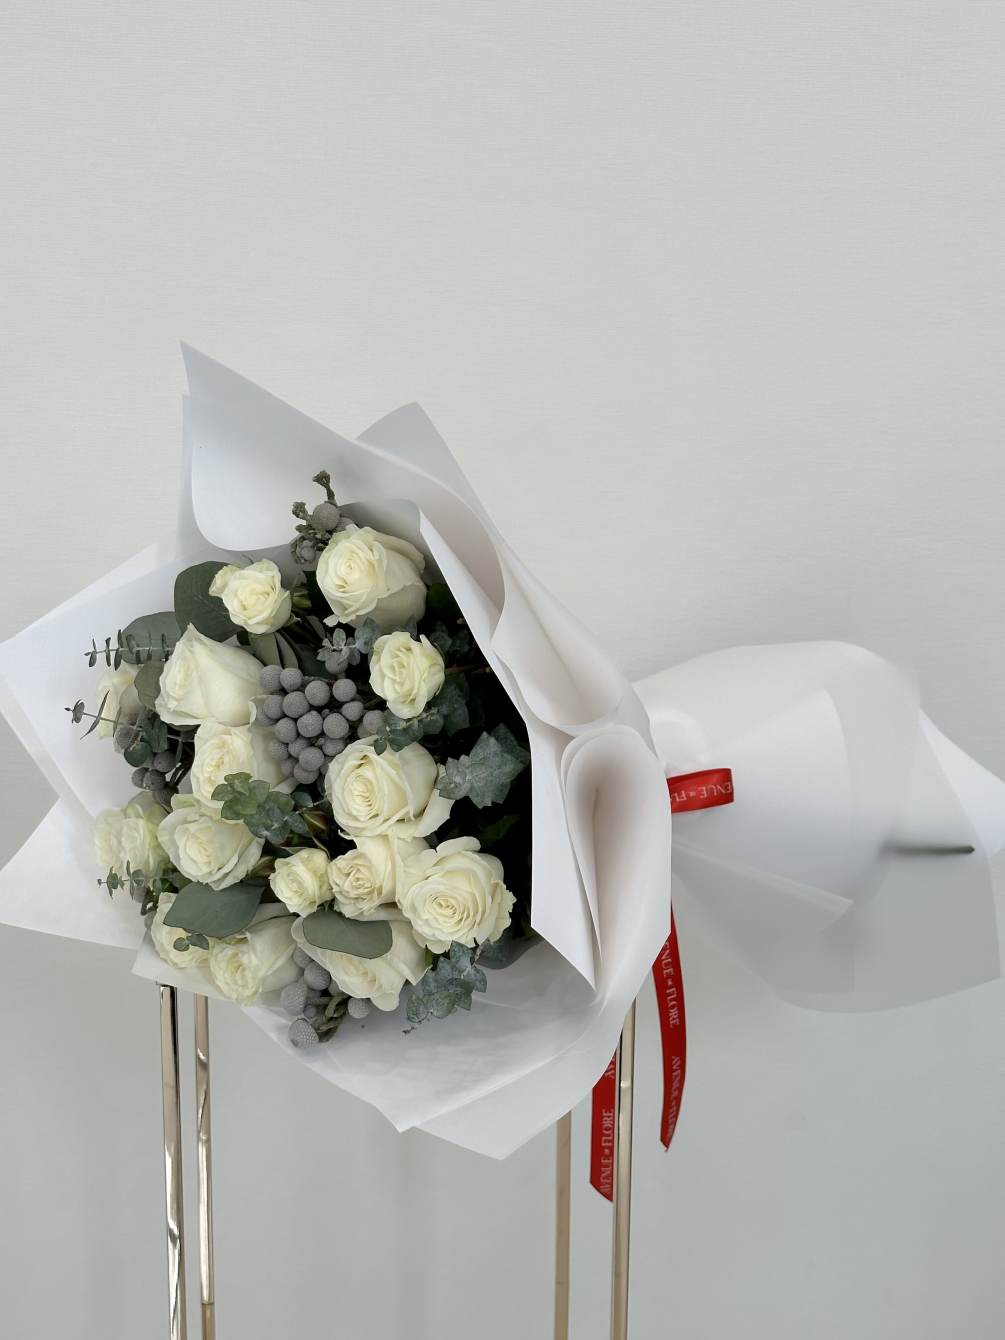 This stunning bouquet of pristine white roses captivates with its timeless elegance